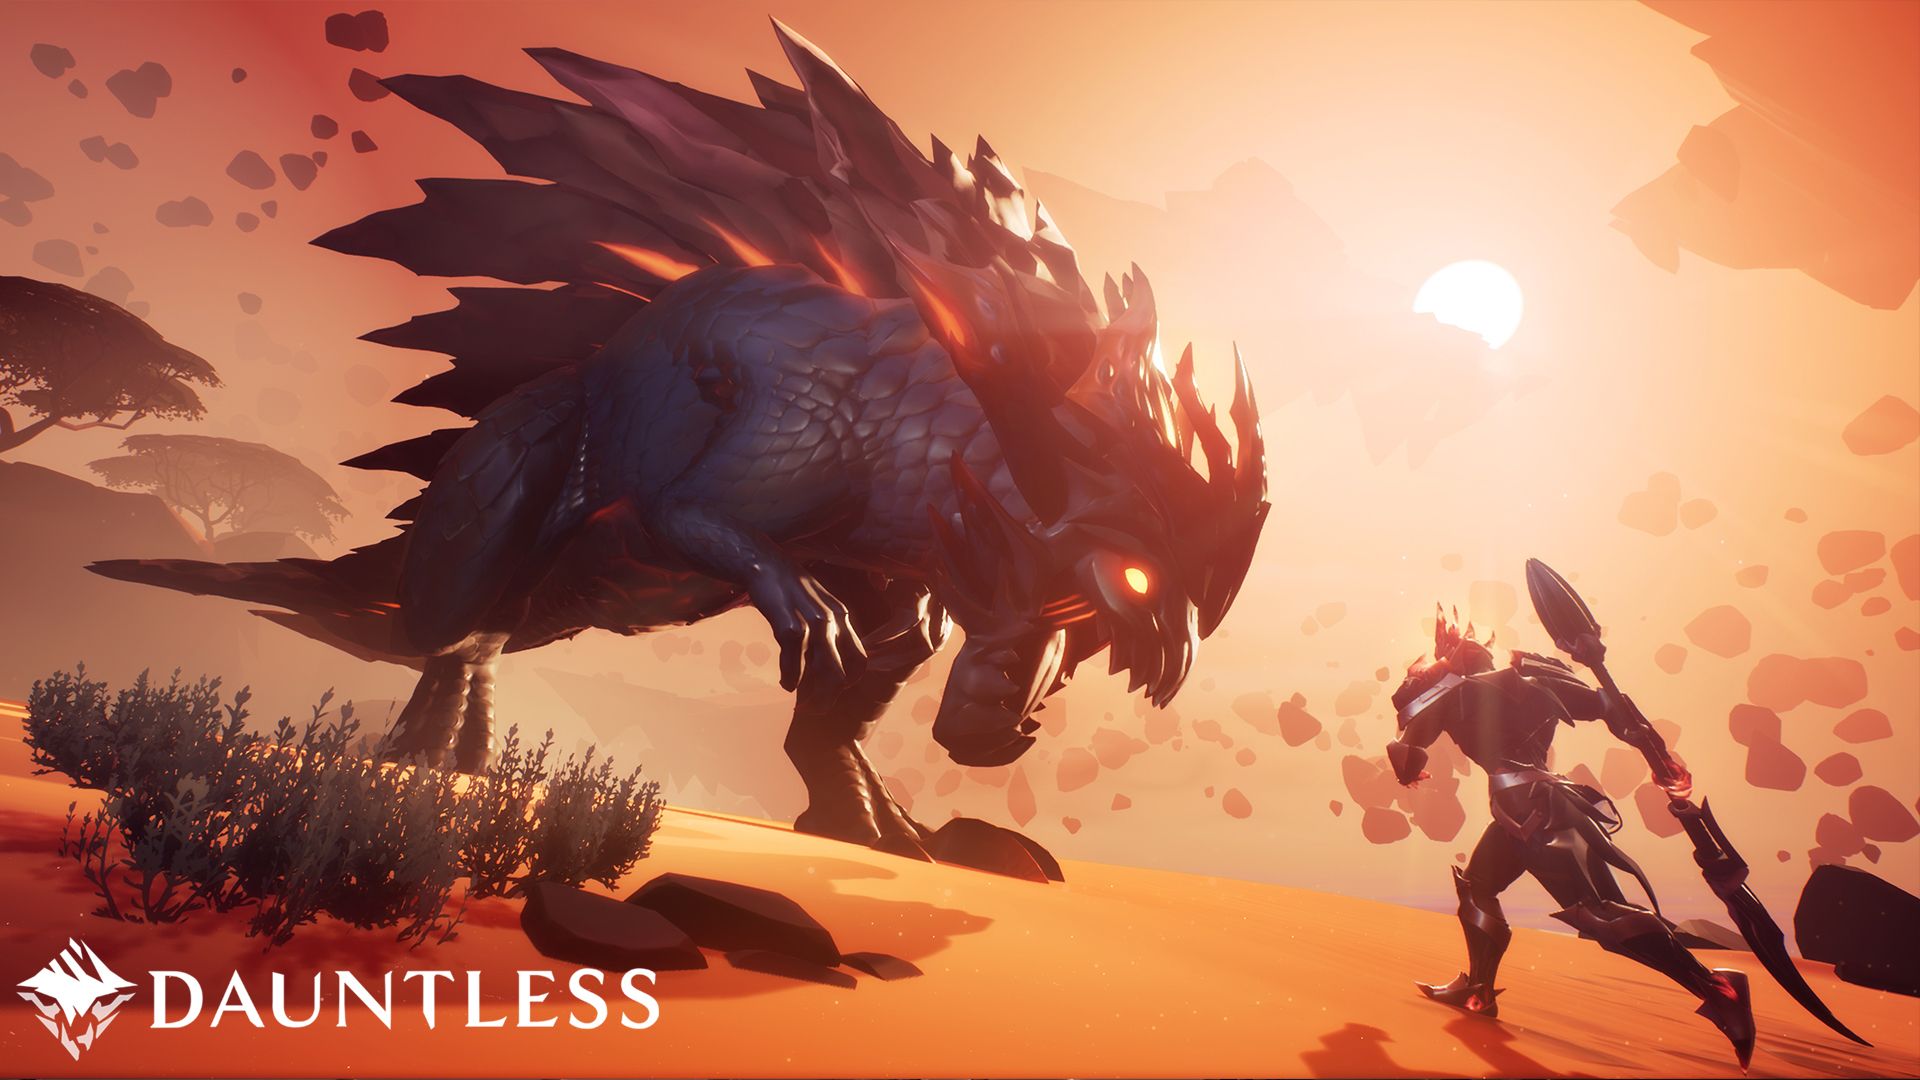 Free Monster Hunter Like RPG Dauntless Now Available On PC In Open